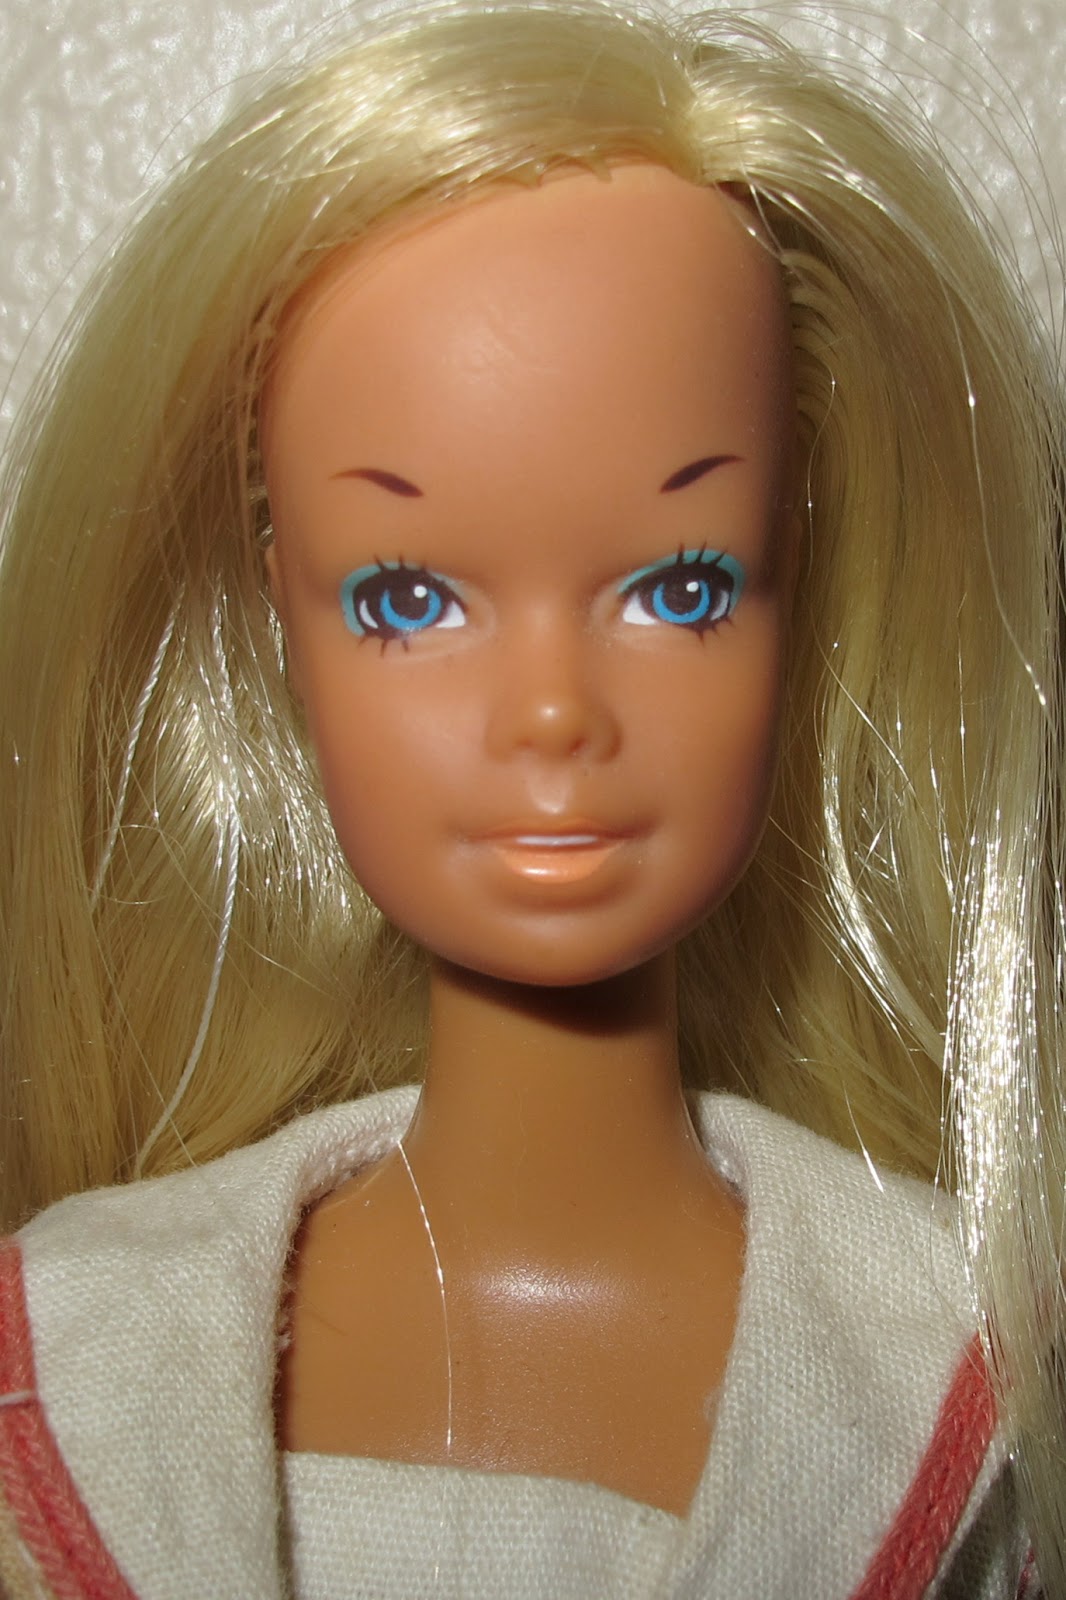 My Vintage Barbies Blog: Barbie's of the Month: Newport Barbie and Yellowstone